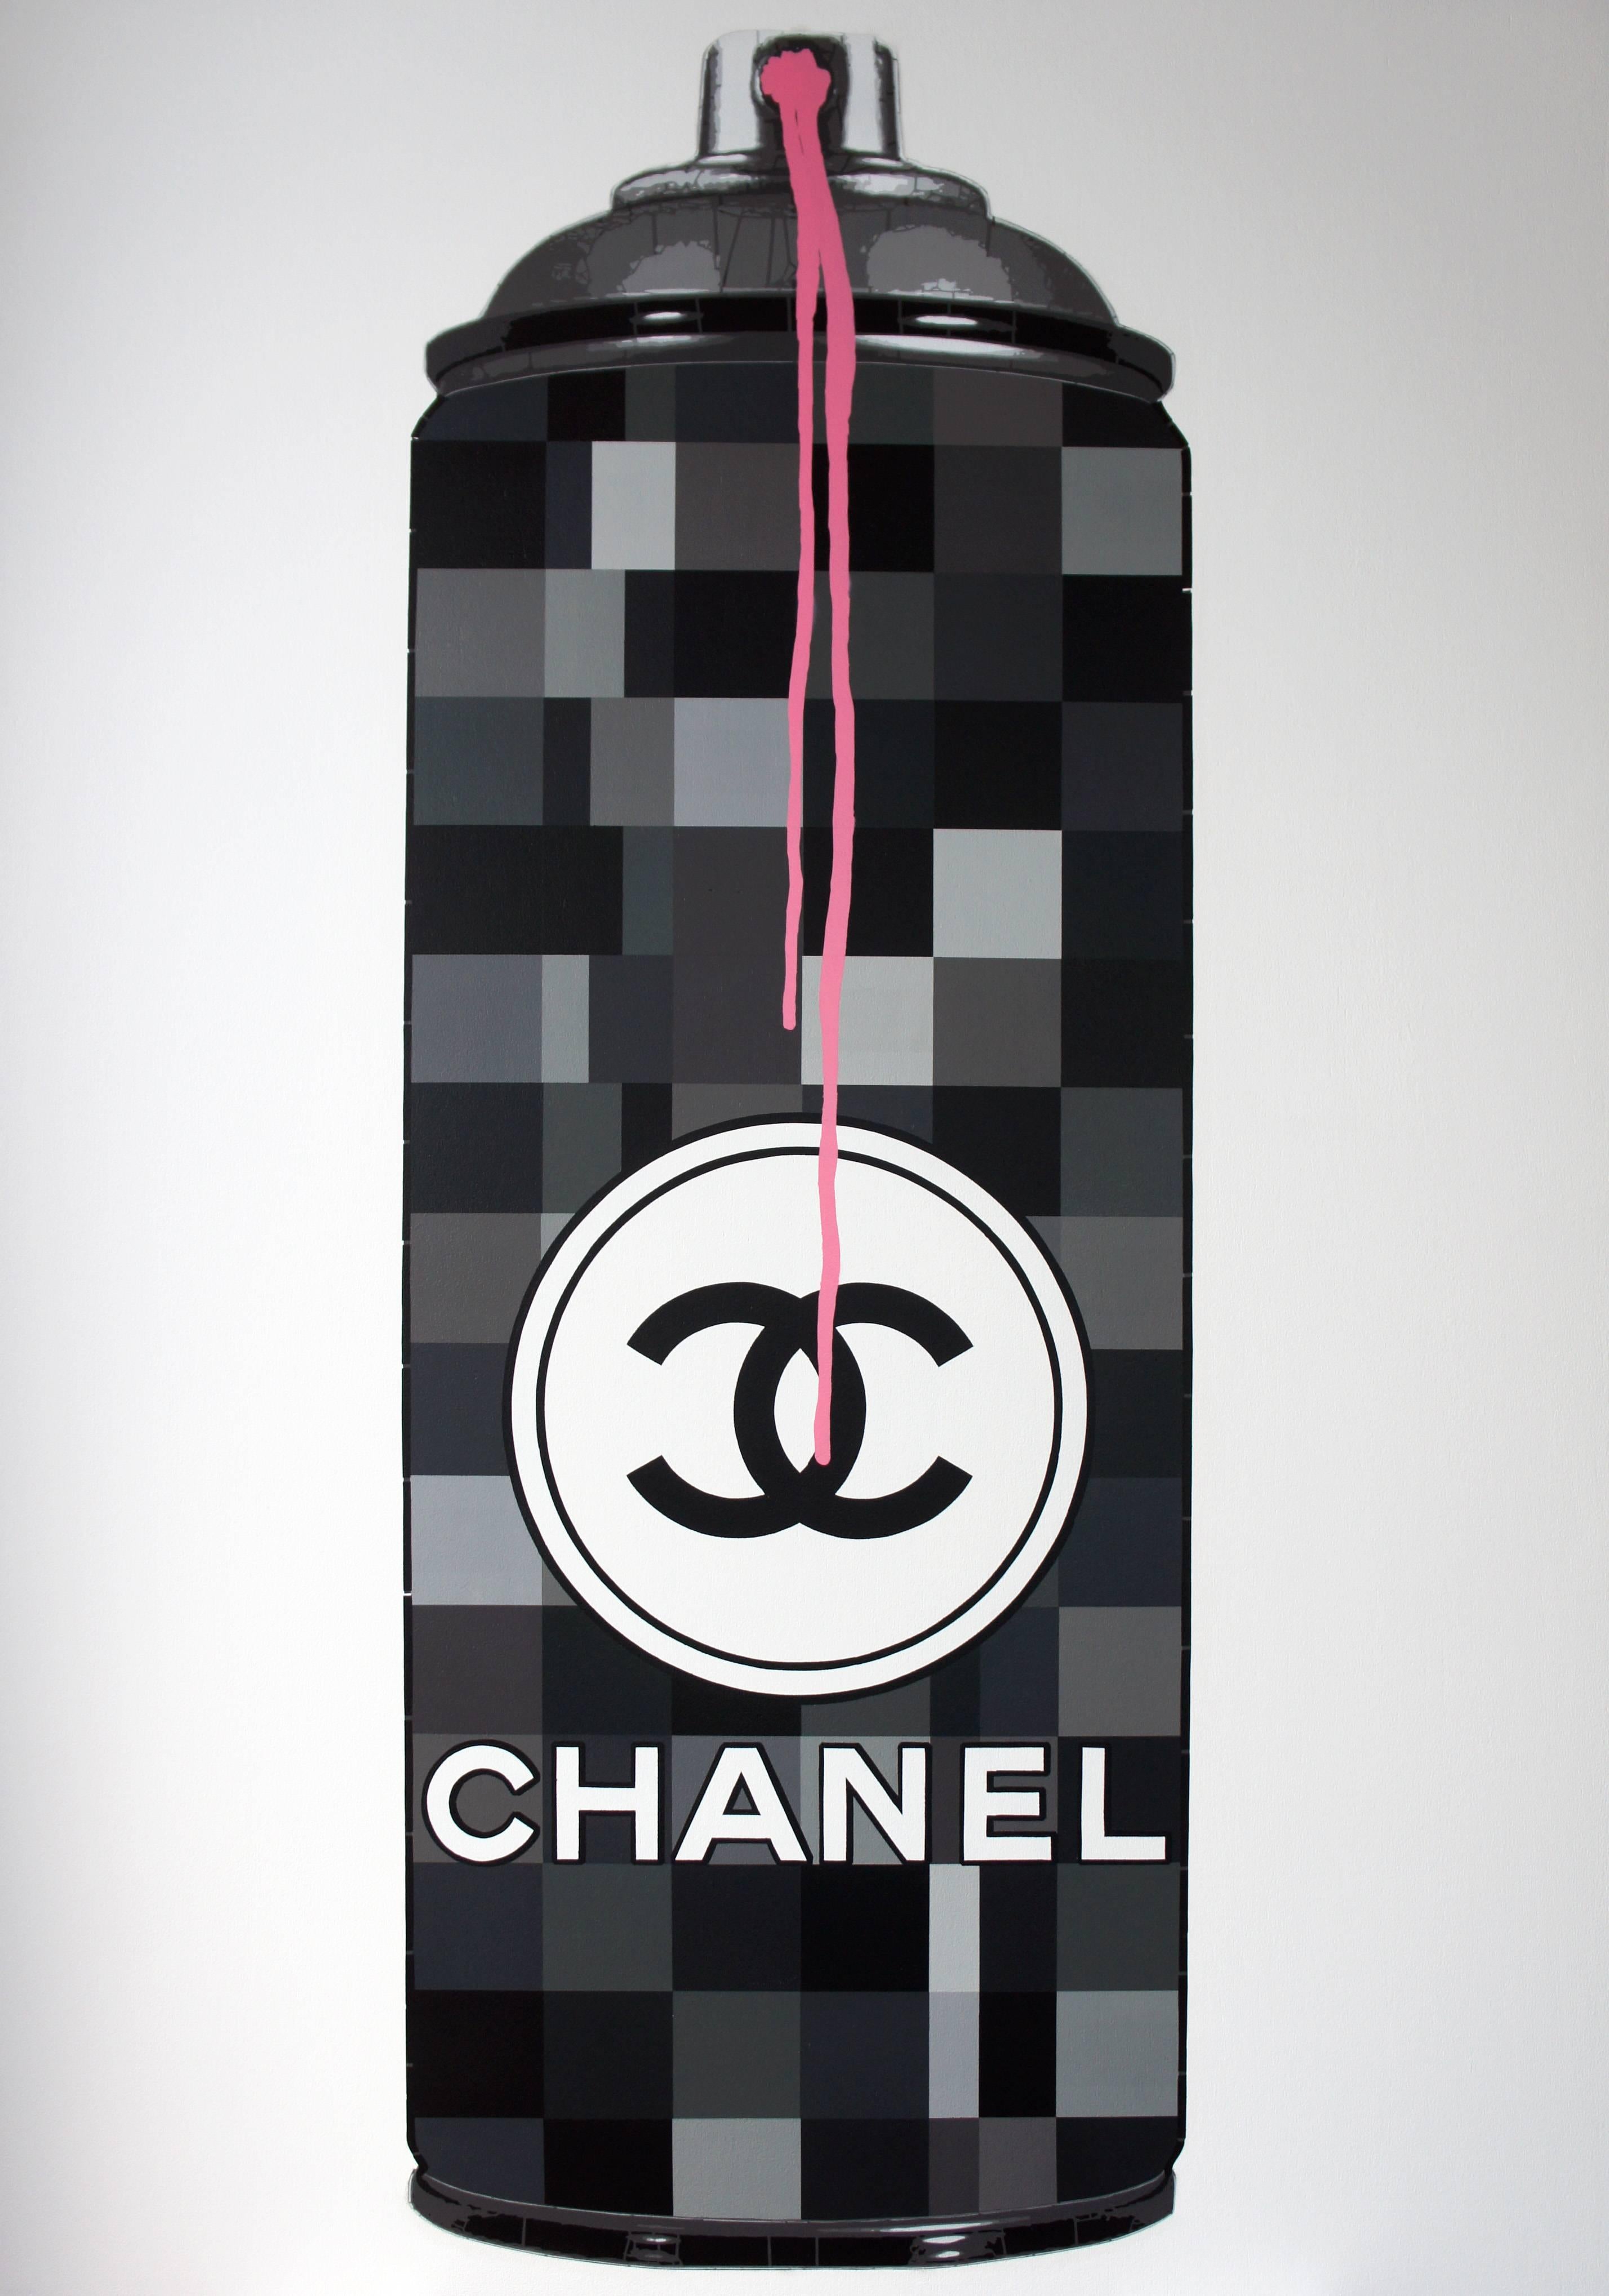 Chanel Radio - Painting by Campbell la Pun